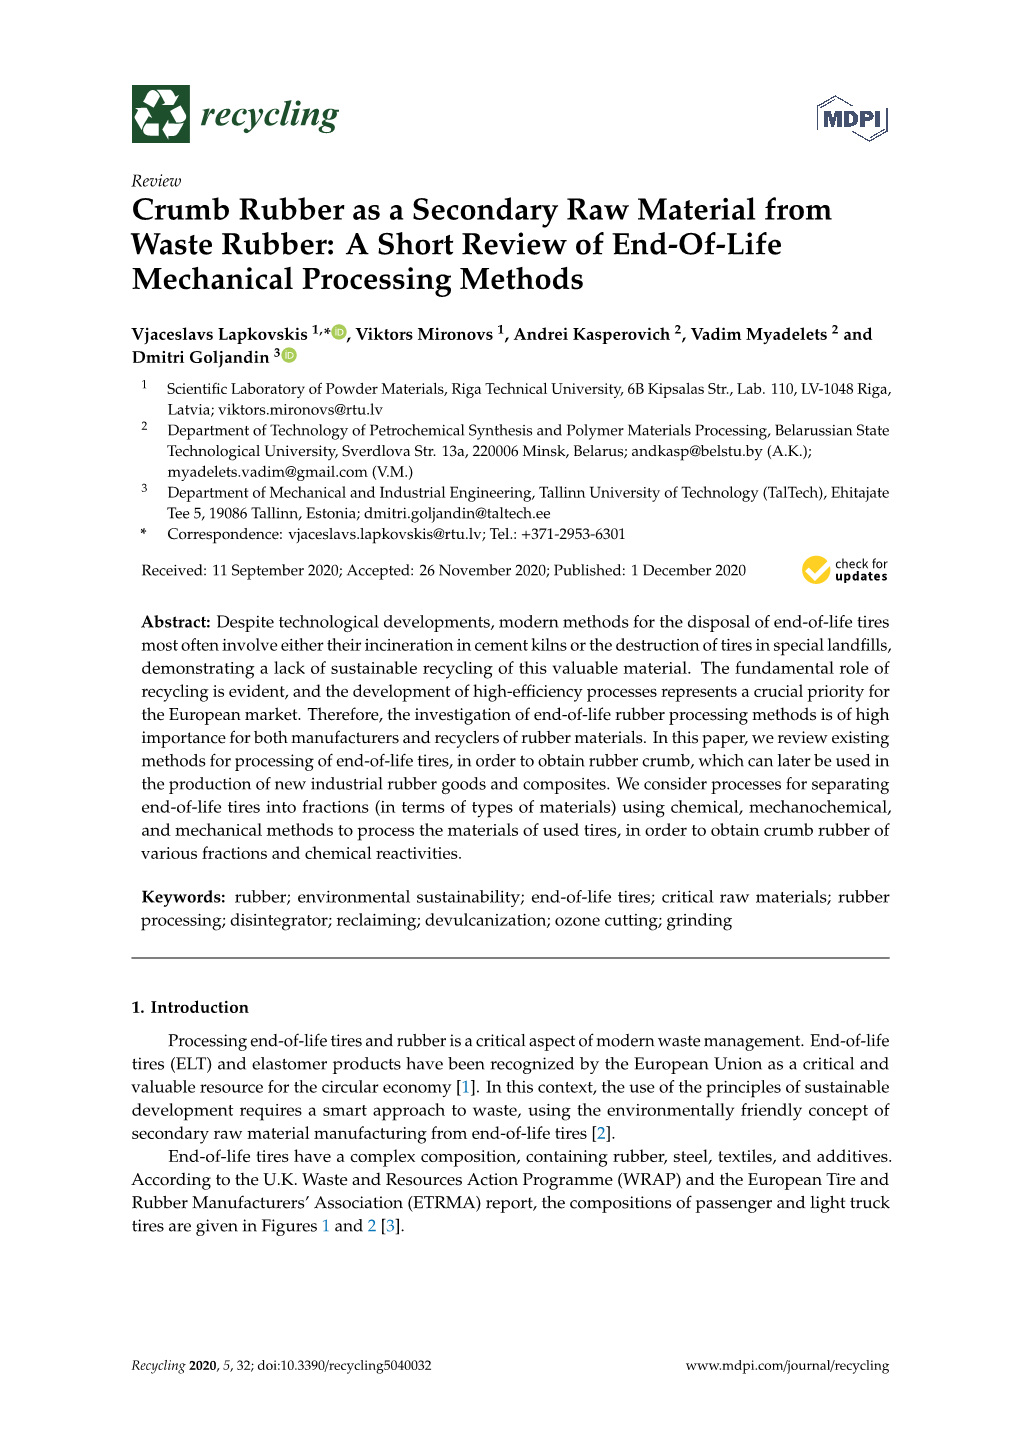 Crumb Rubber As a Secondary Raw Material from Waste Rubber: a Short Review of End-Of-Life Mechanical Processing Methods